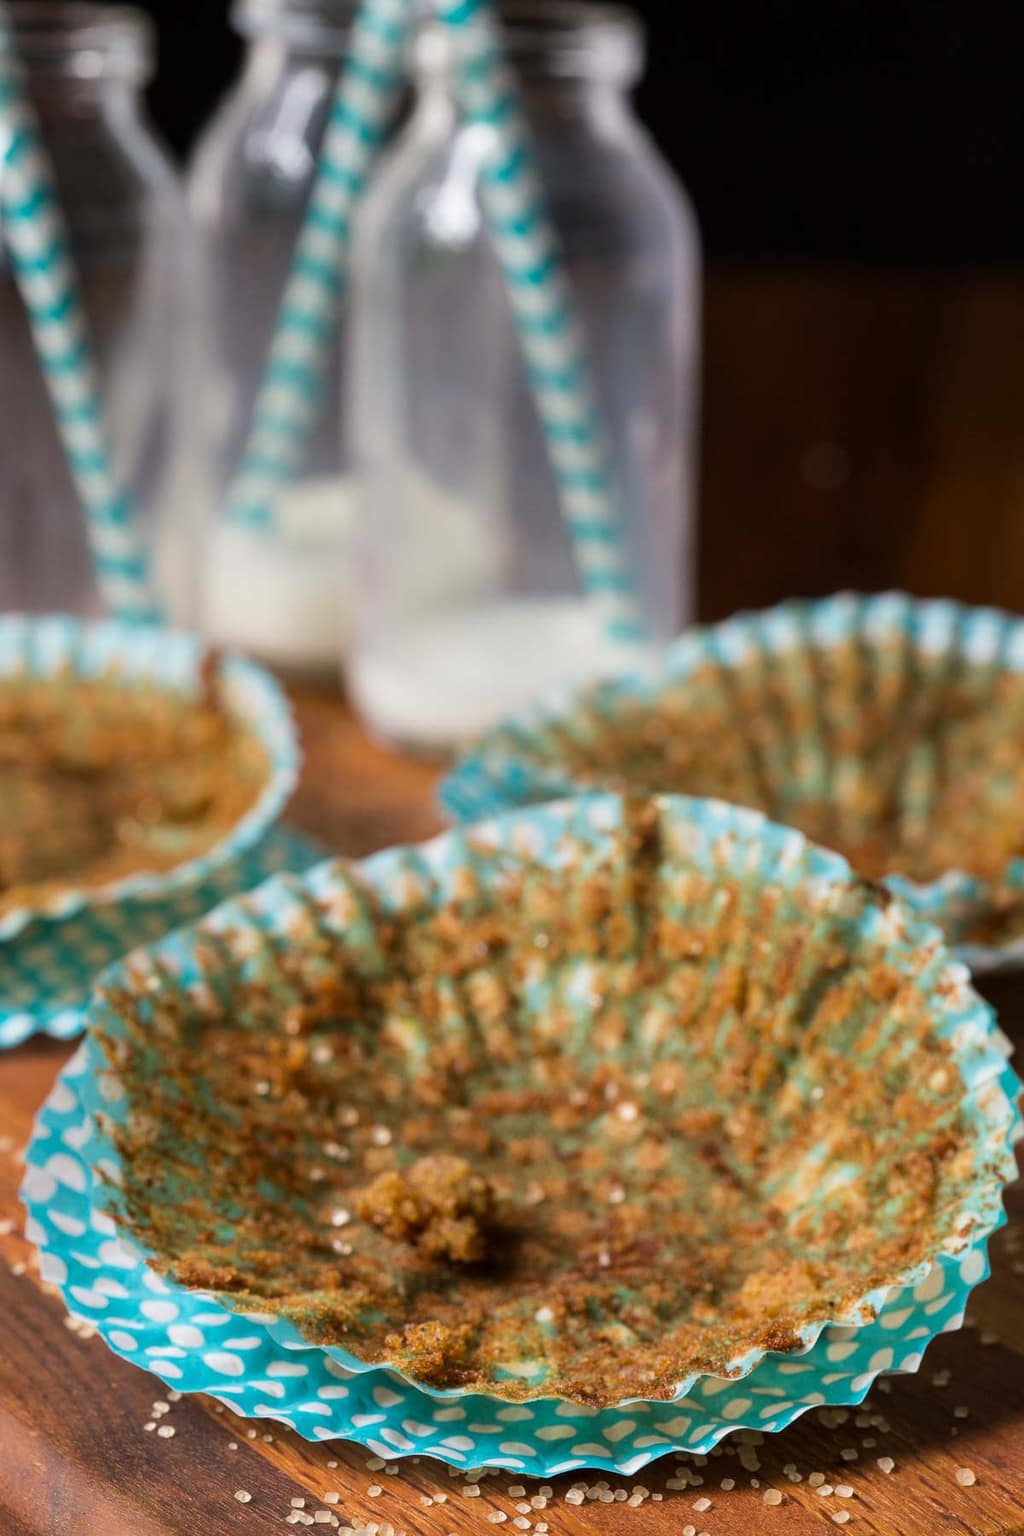 Photo of empty turquoise cupcake liners which once held Zucchini Morning Glory Muffins. Empty milk jars are in the background.